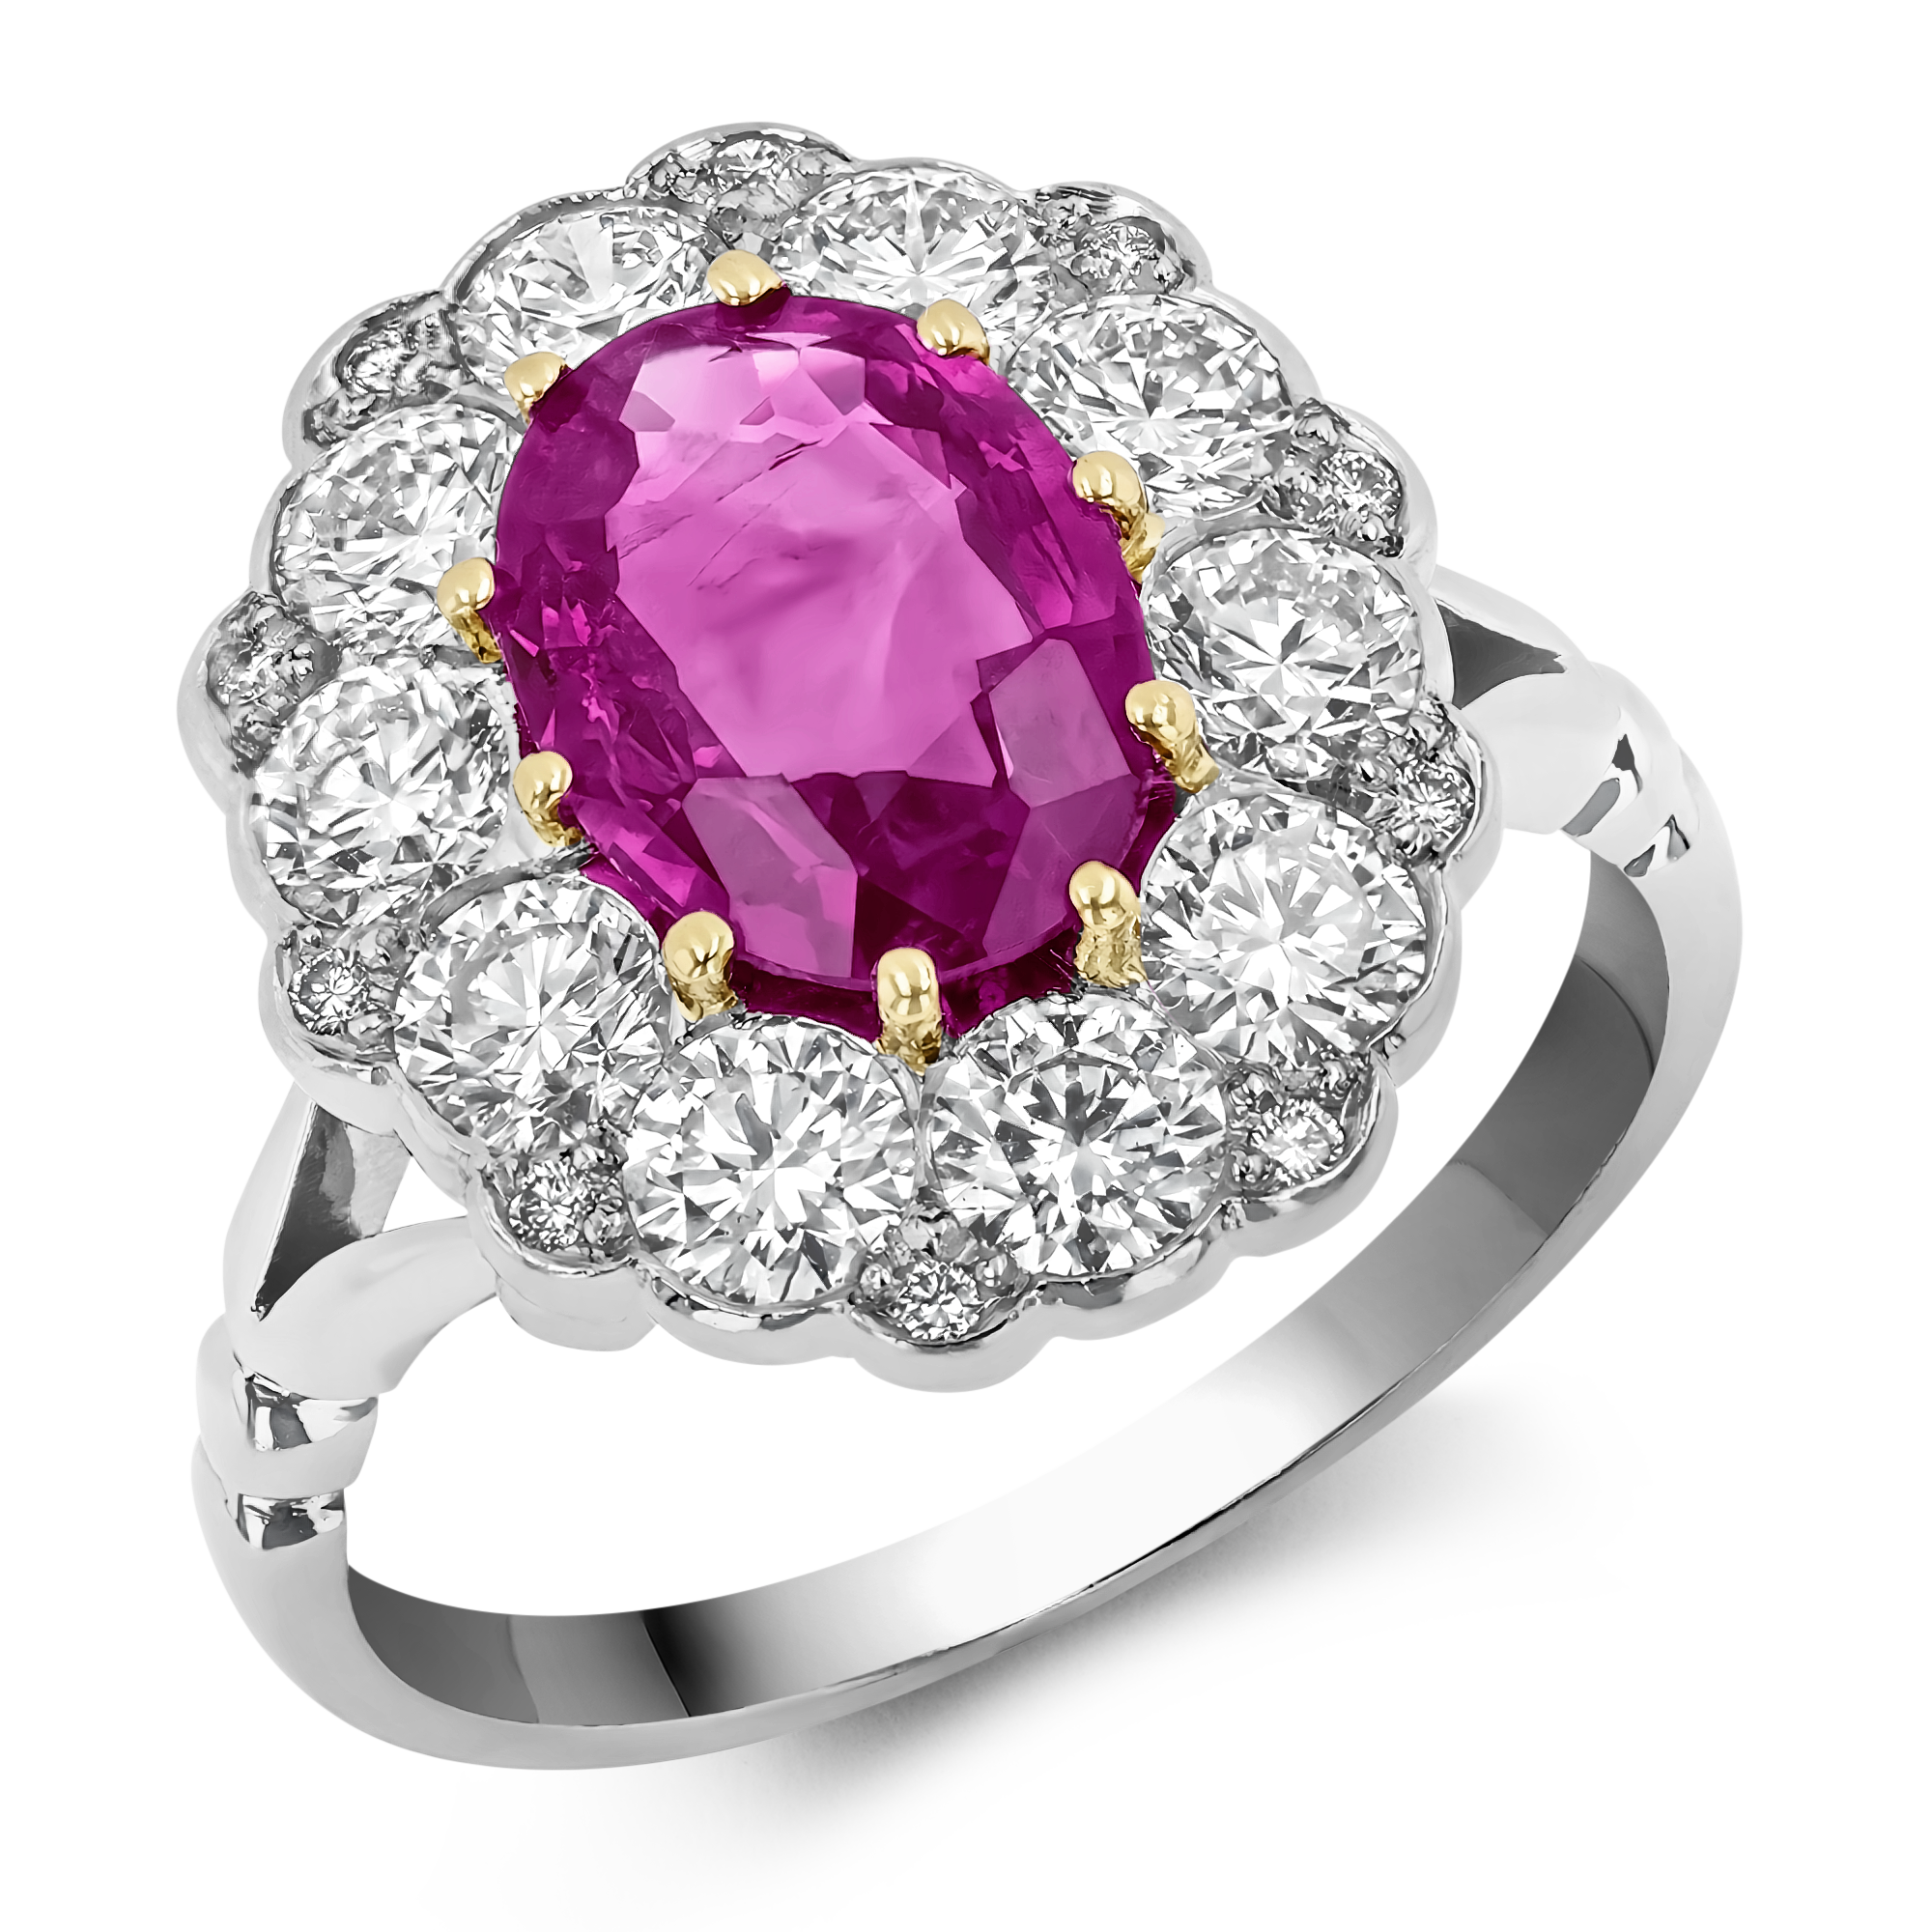 Contemporary 1.66ct Burmese Pink Sapphire and Diamond Cluster Ring Oval Cut, Claw Set_1